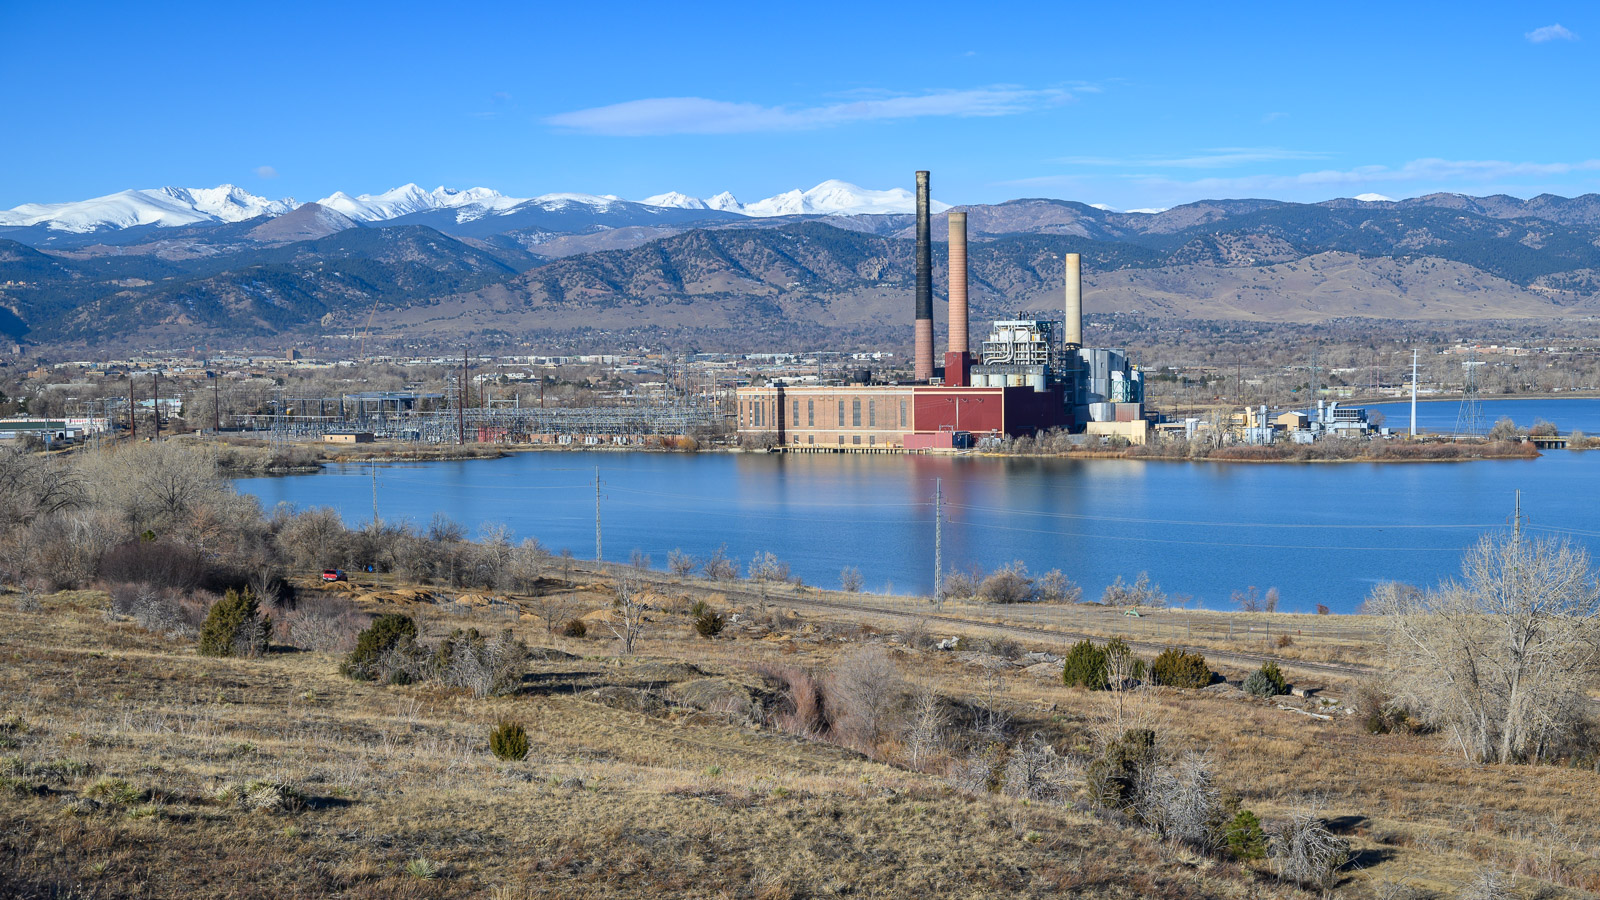 Valmont station power plant sits between the resevoir and the snow-capped Rocky Mountains in Boulder, Colorado.